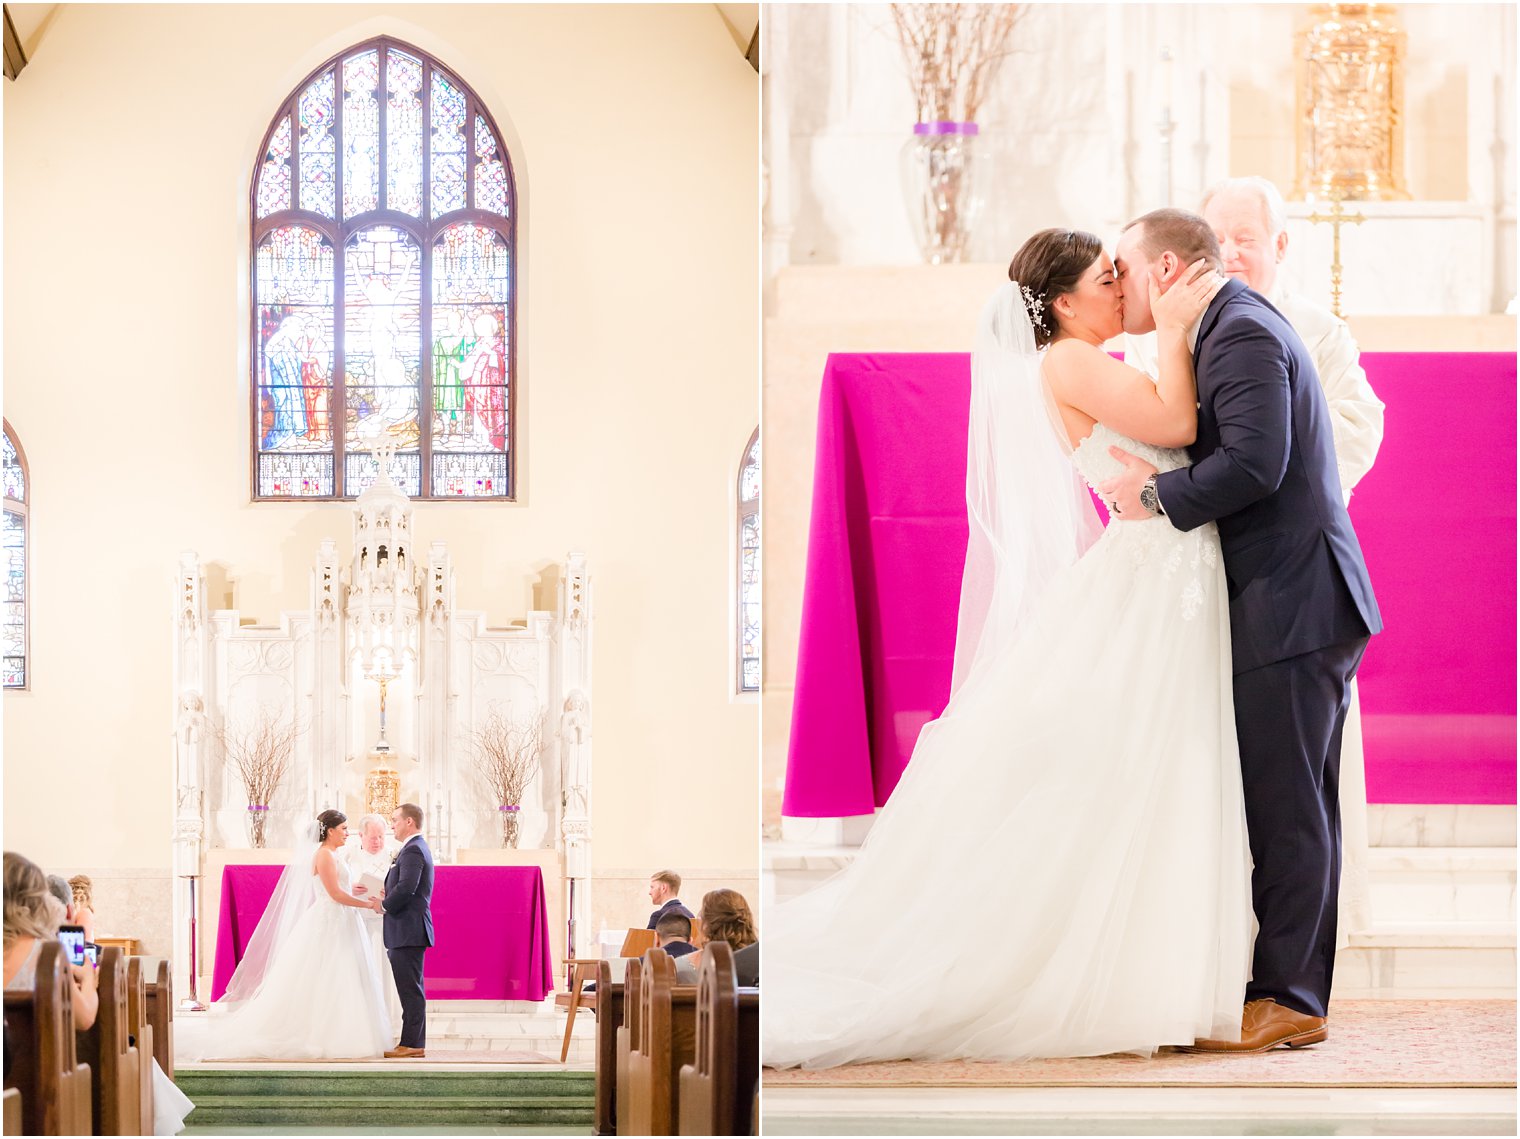 First kiss photo of bride and groom during ceremony at St. Rose in Belmar NJ